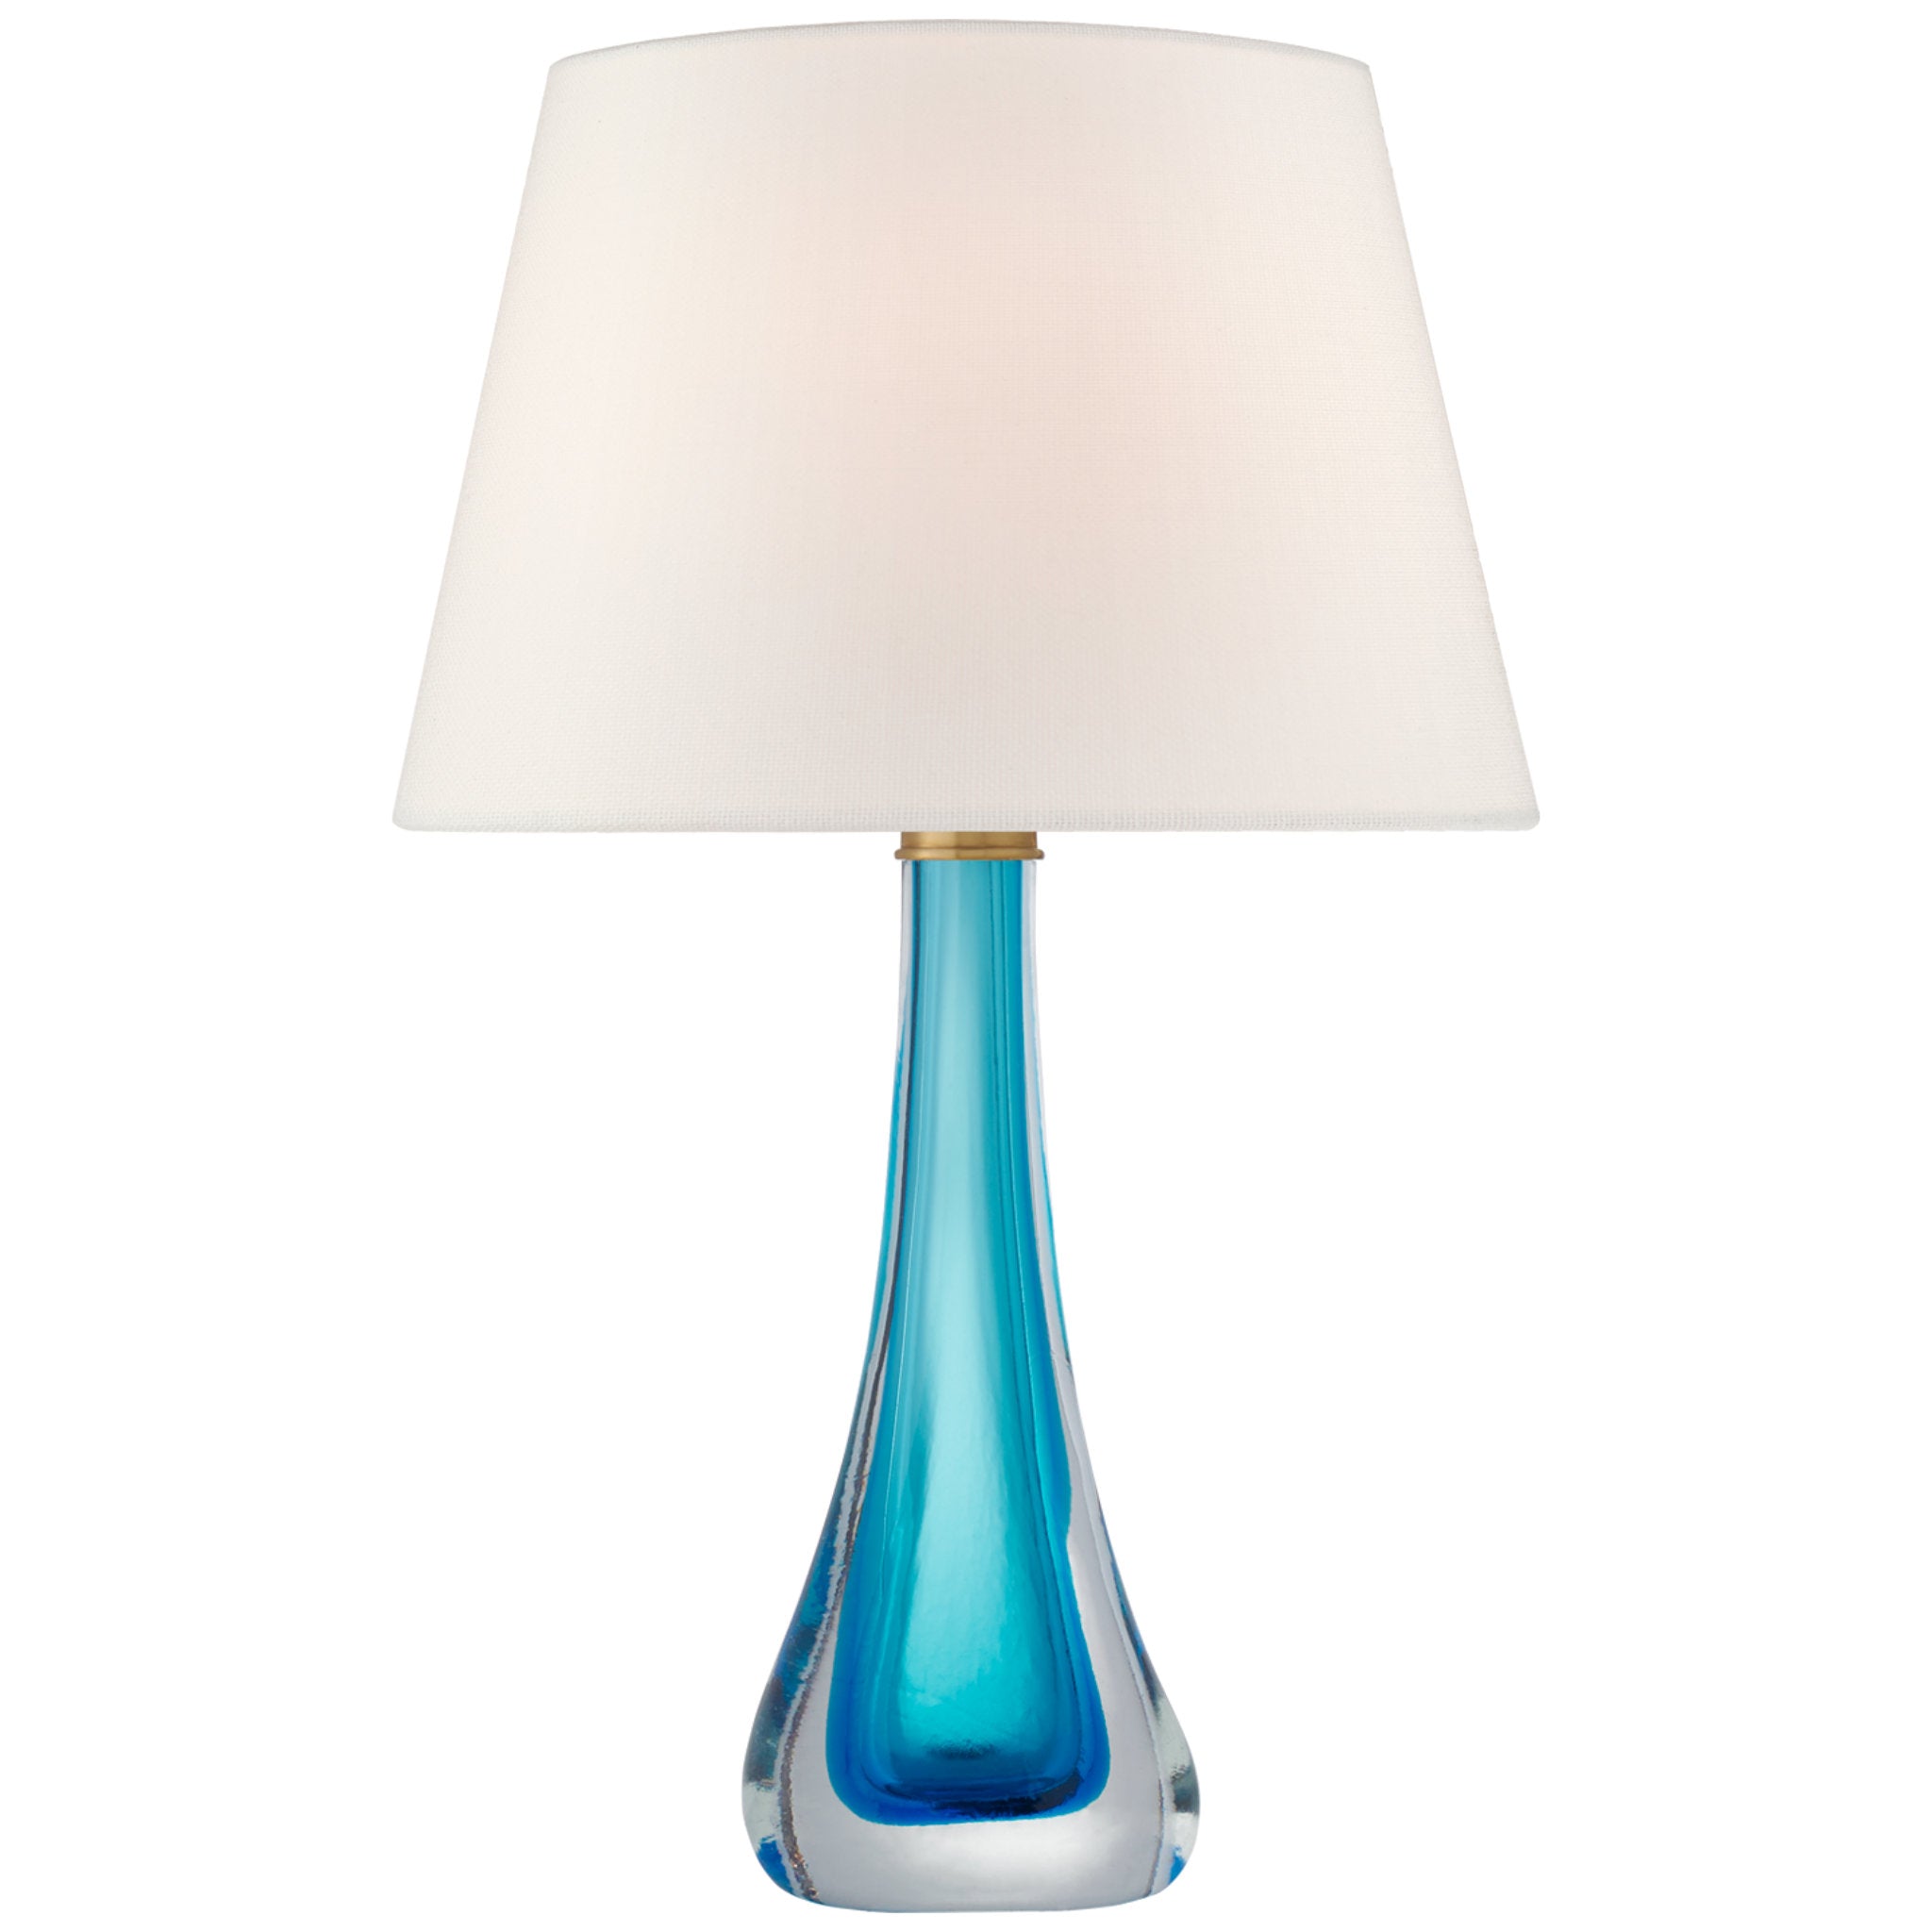 Julie Neill Christa Large Table Lamp in Cerulean Blue Glass with Linen Shade